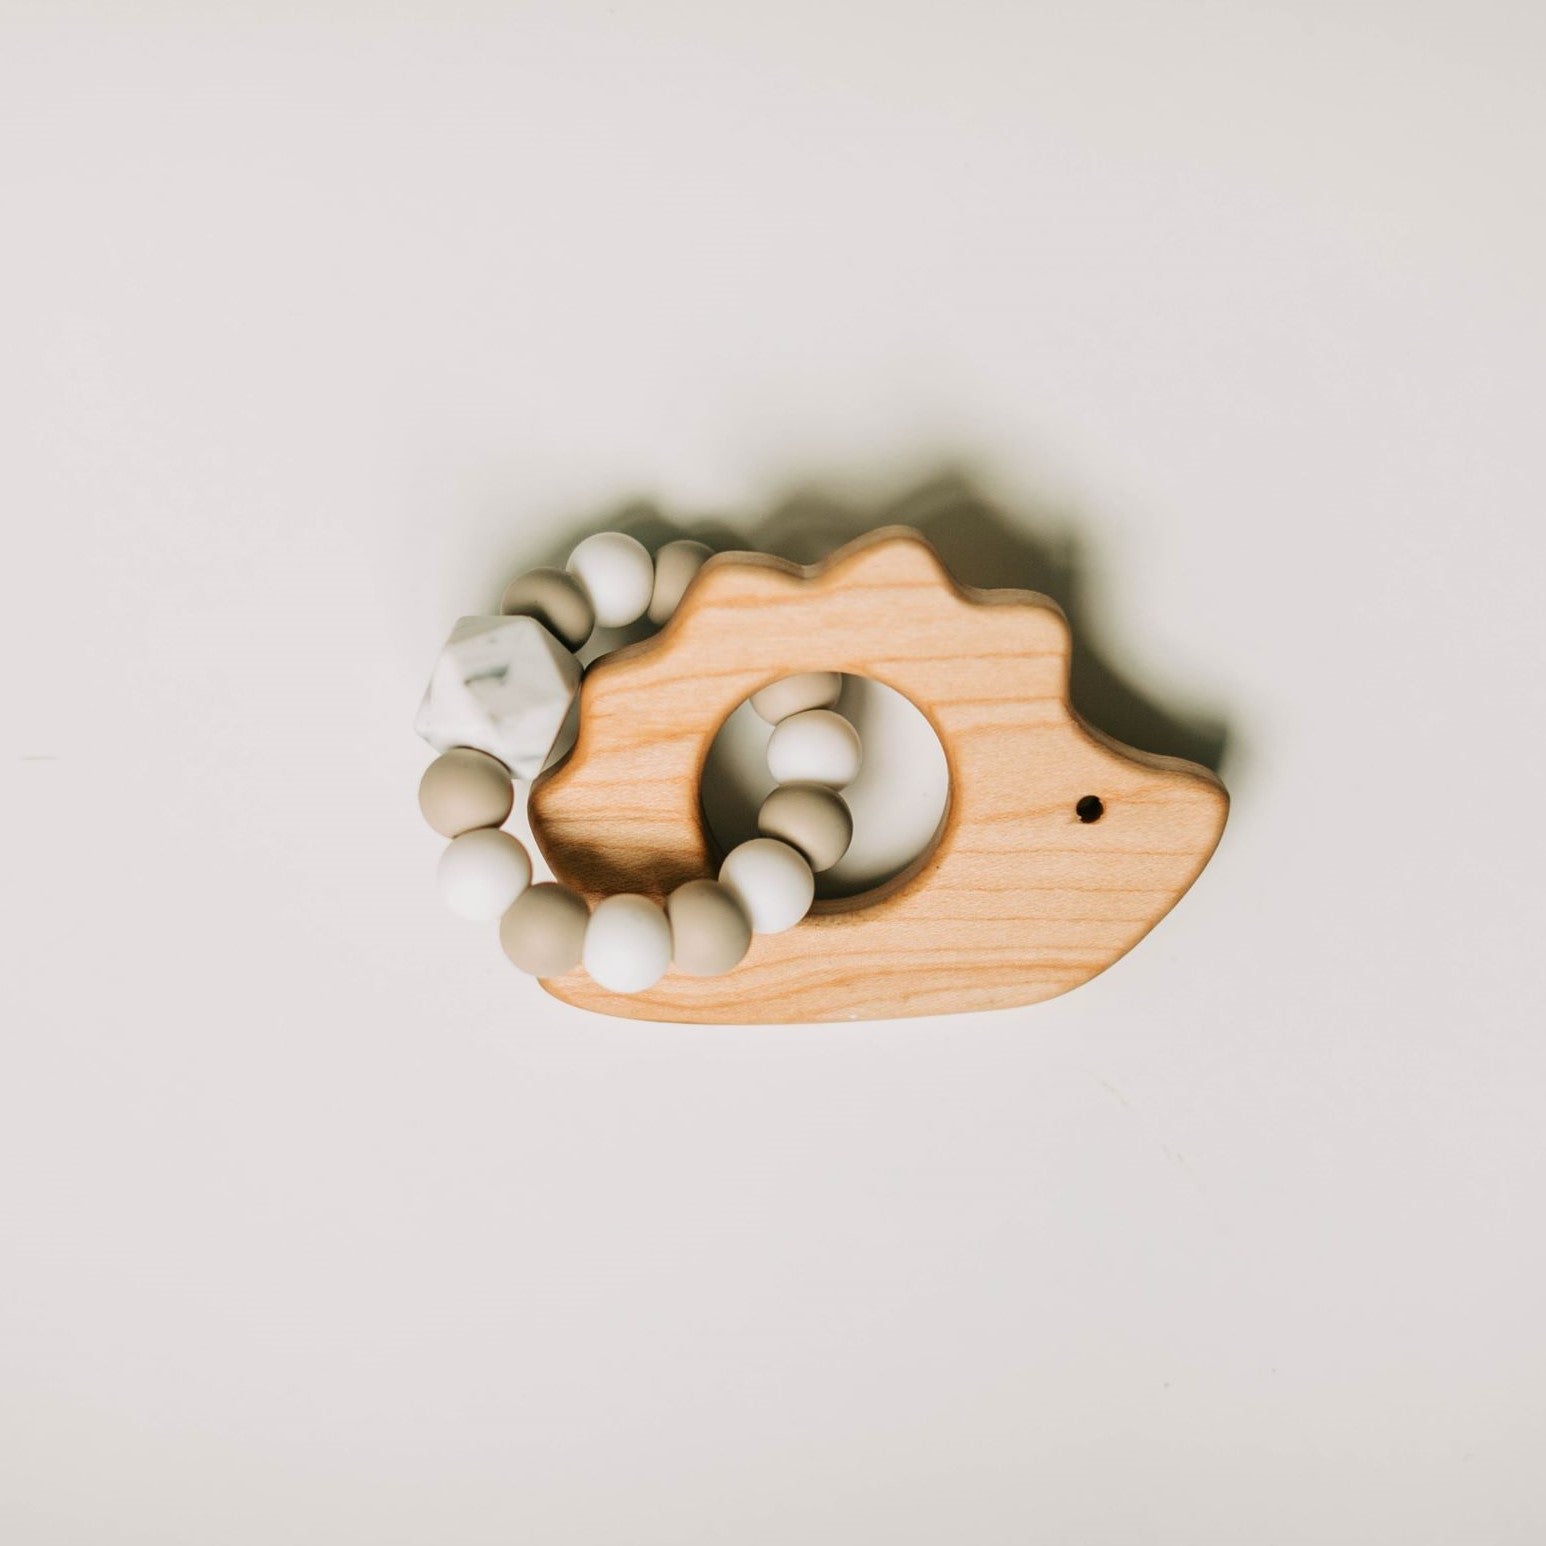 Custom Wooden Hedgehog Teether with Beaded Silicone Ring